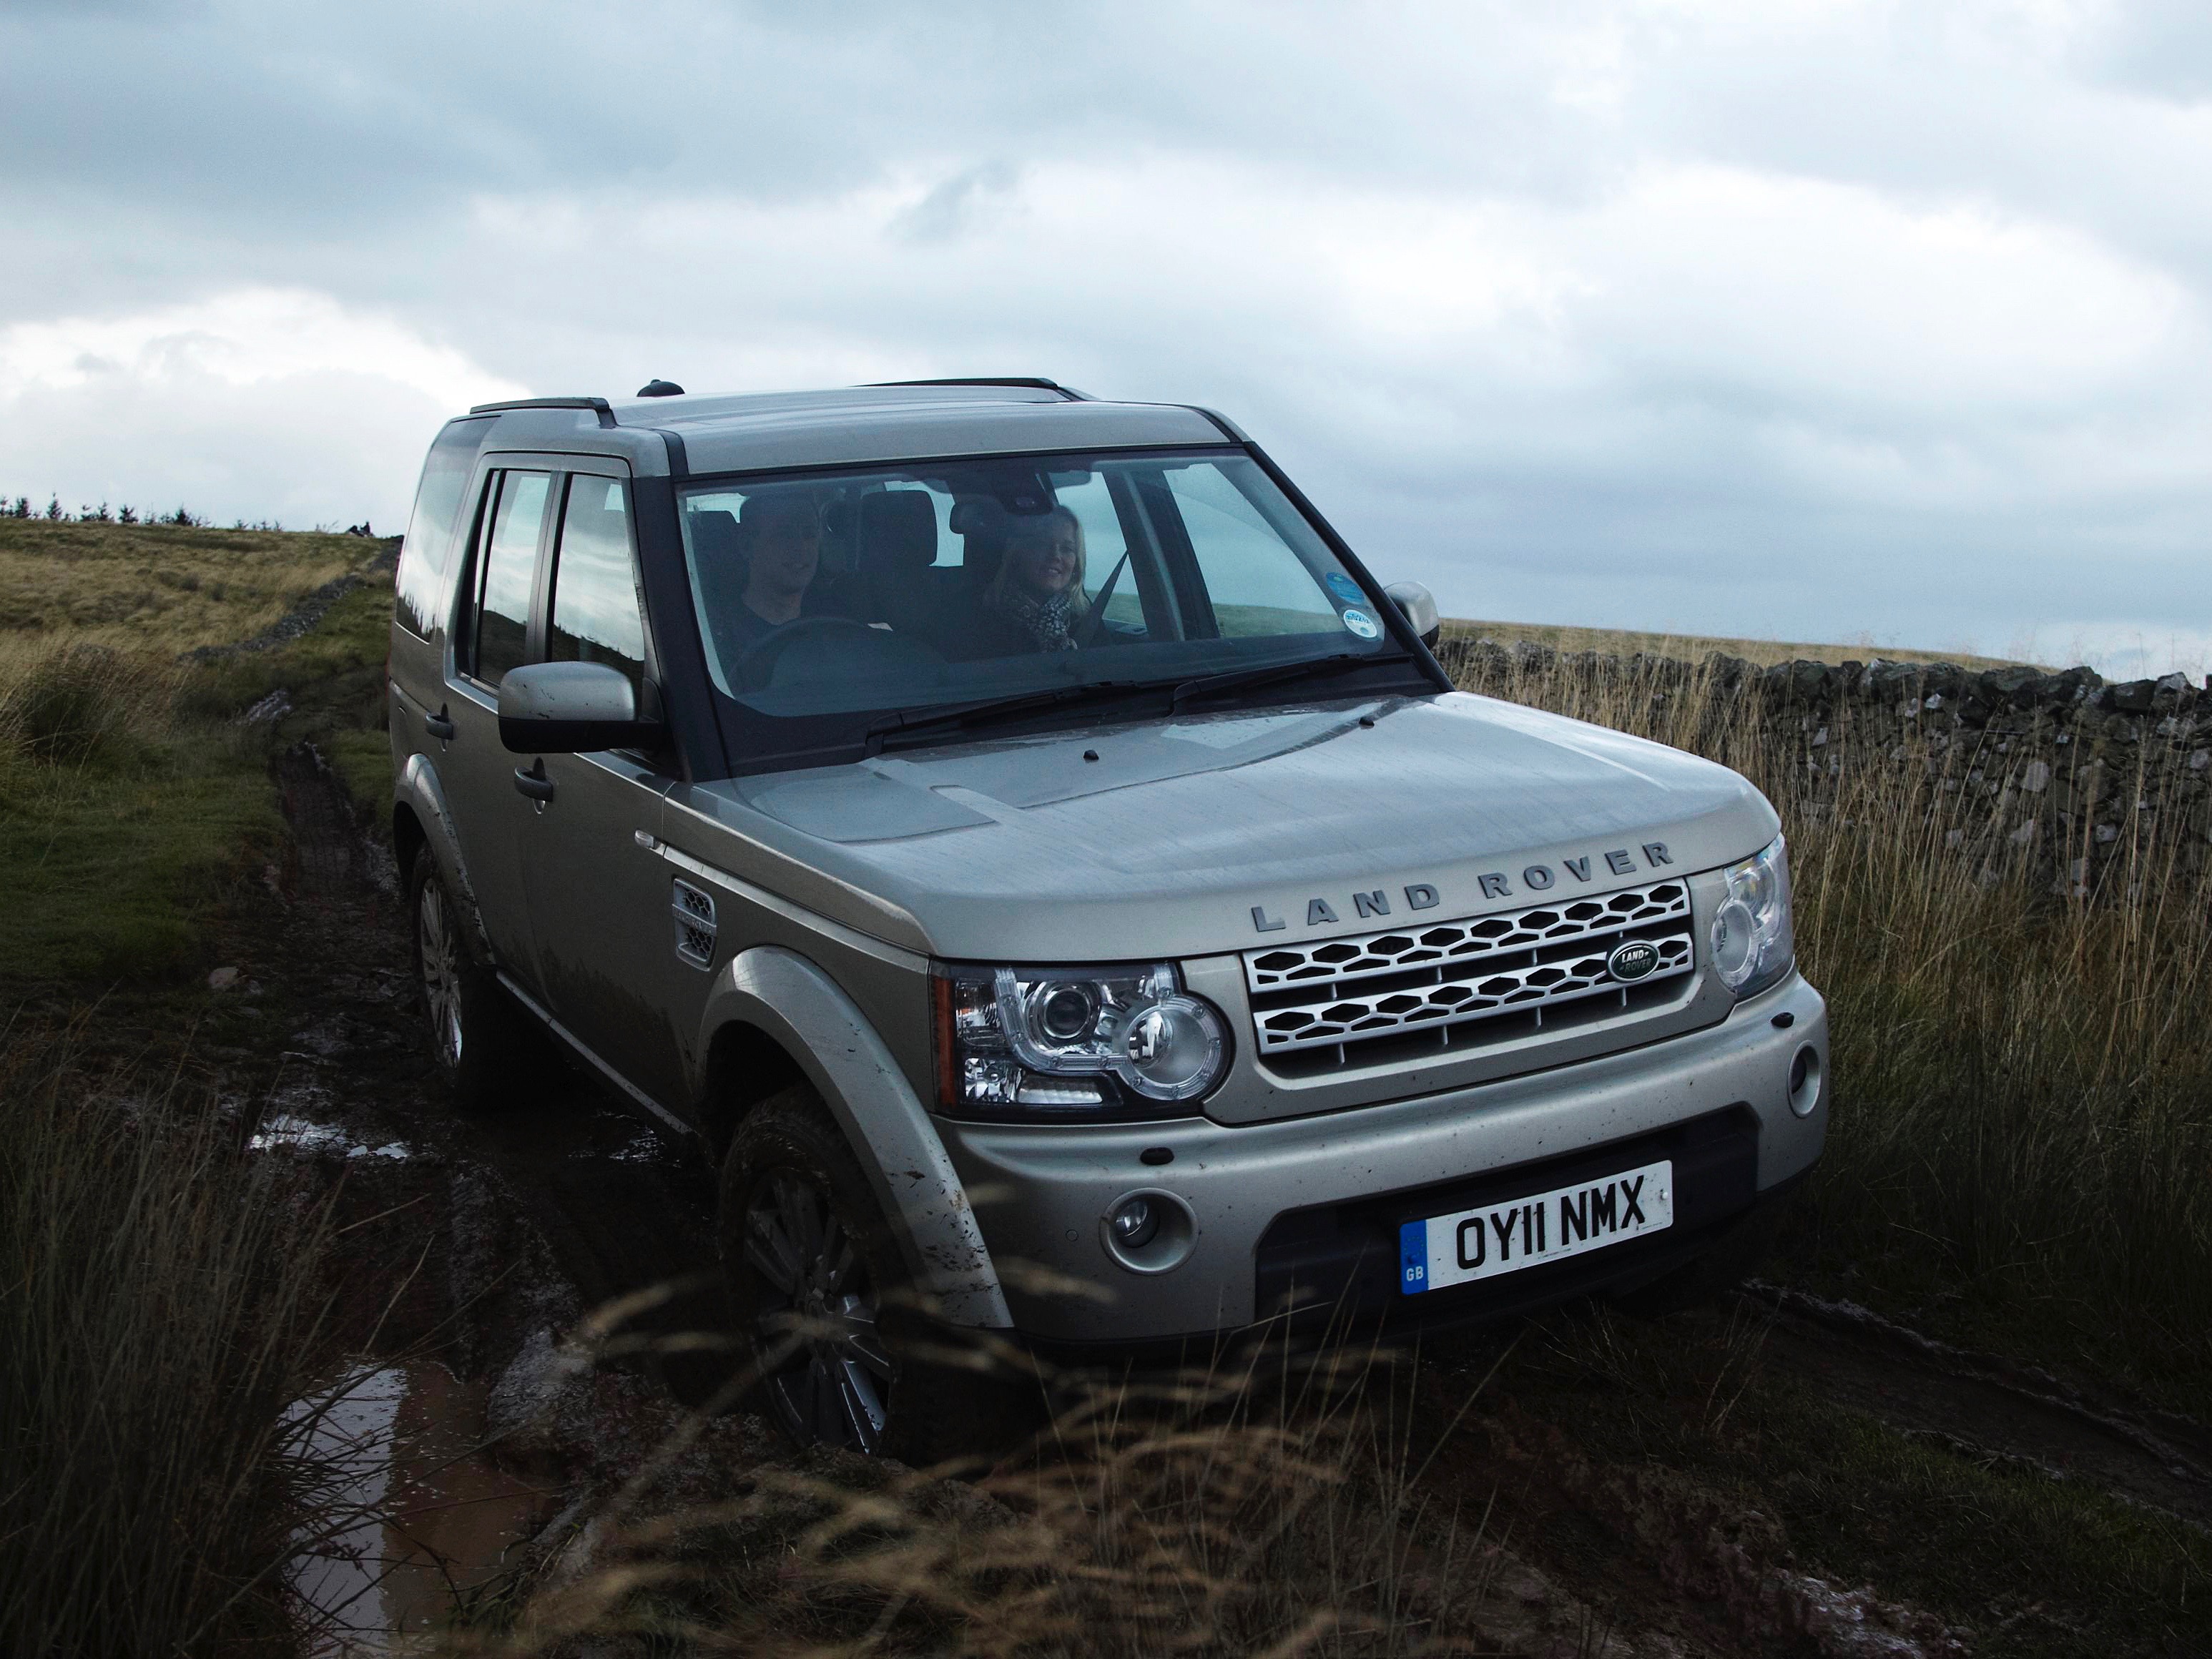 2014 Land Rover Lr4 Reviews, Insights, And Specs | Carfax